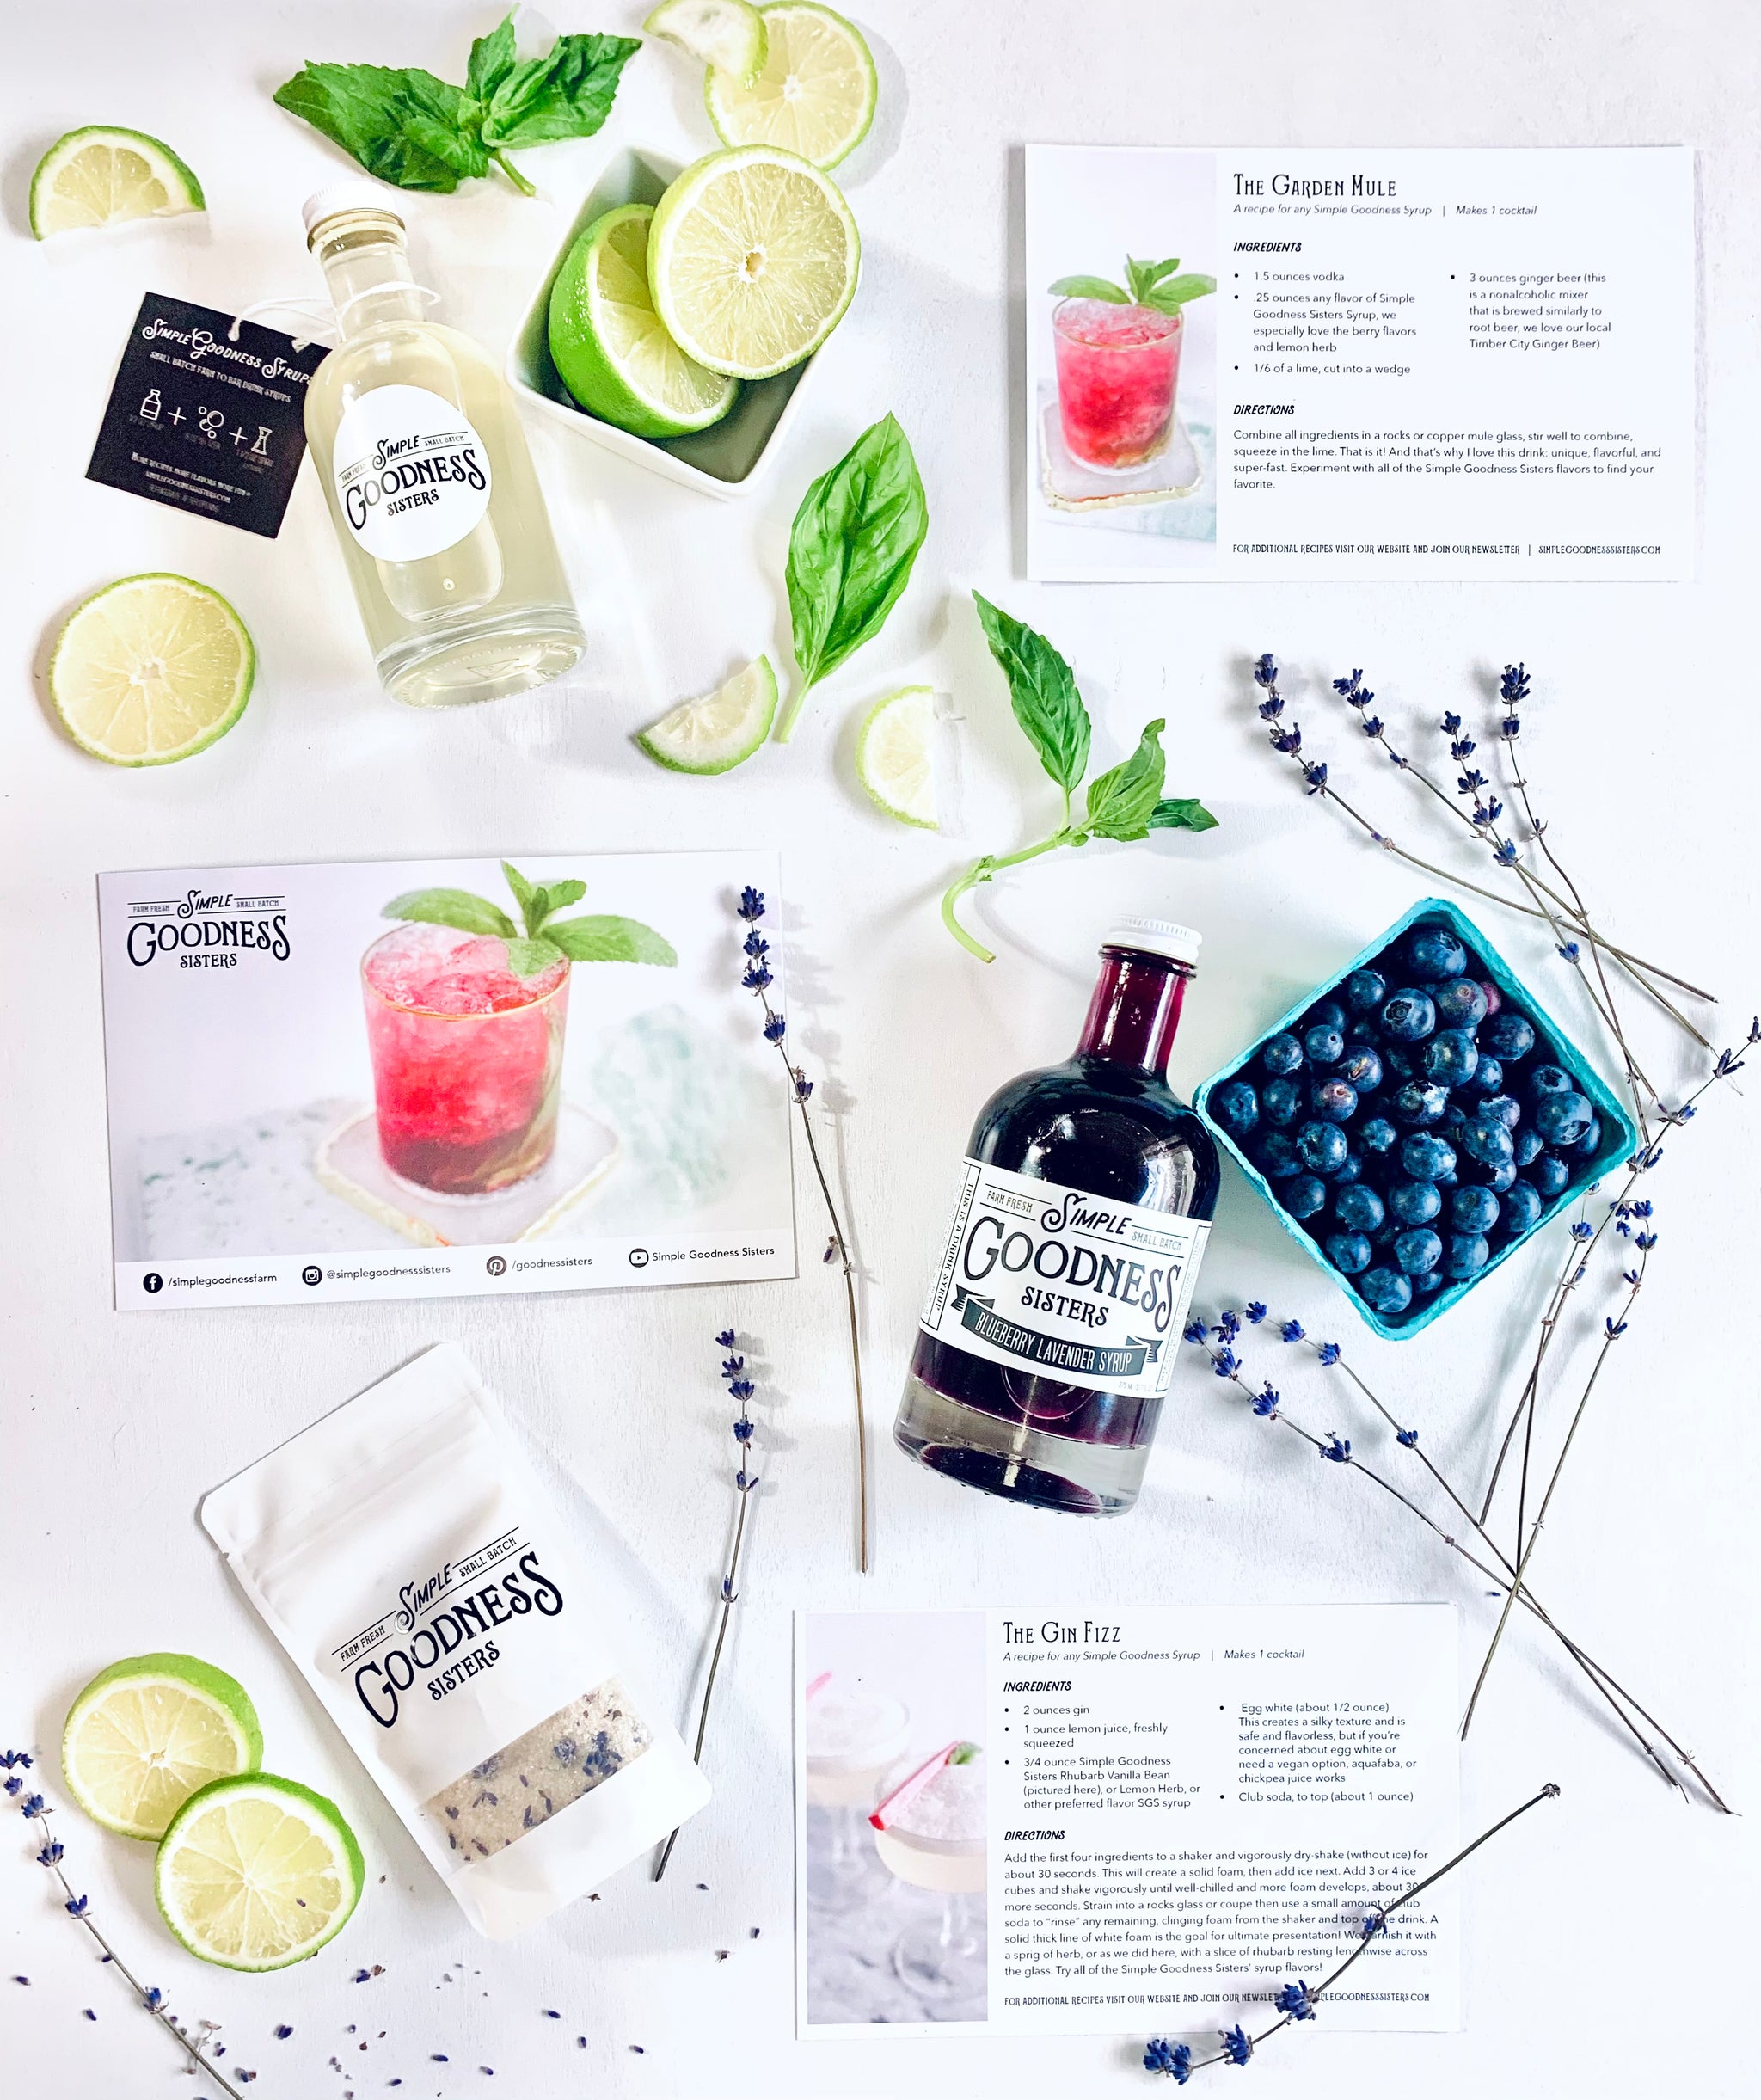 Homemade Gin Kit – Collection by Plain Vanilla